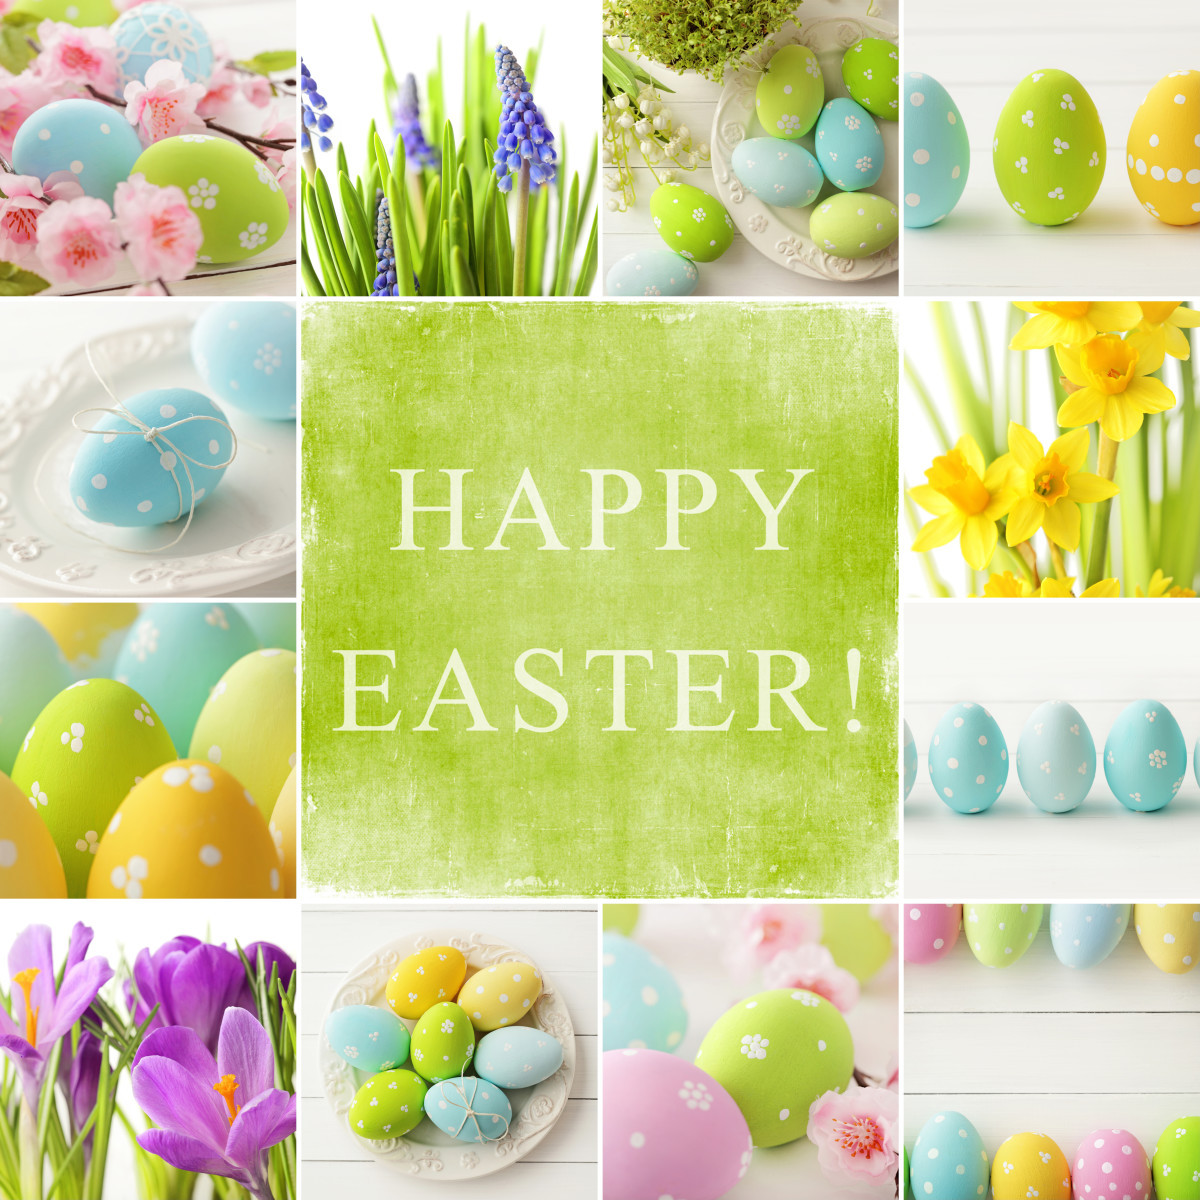 Happy Easter Quotes And Images
 20 Happy Easter Messages & Wishes